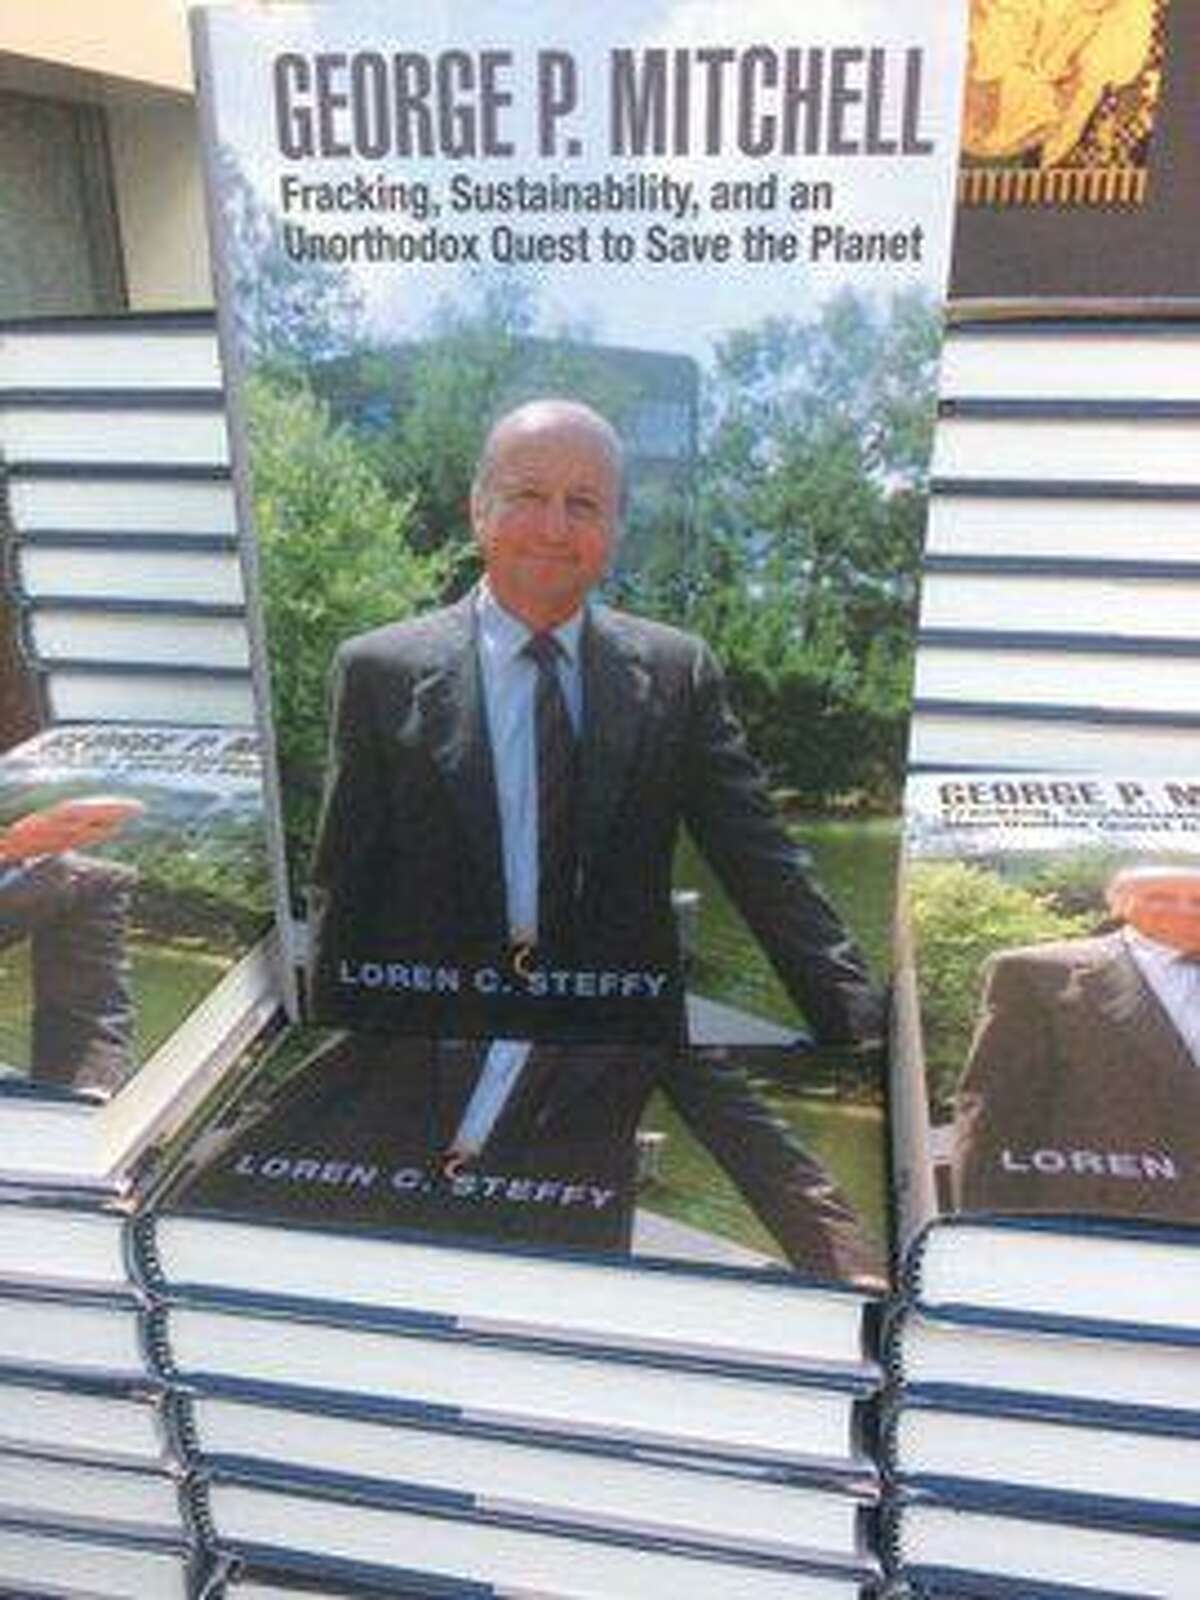 Loren C. Steffy signs copies of his new book on Oct. 10, 2019, which is about oil tycoon and founder of The Woodlands George Mitchell. The book — titled “George P. Mitchell: fracking, sustainability, and an unorthodox quest to save the planet” — was recently published in hardback form and was on sale during the event